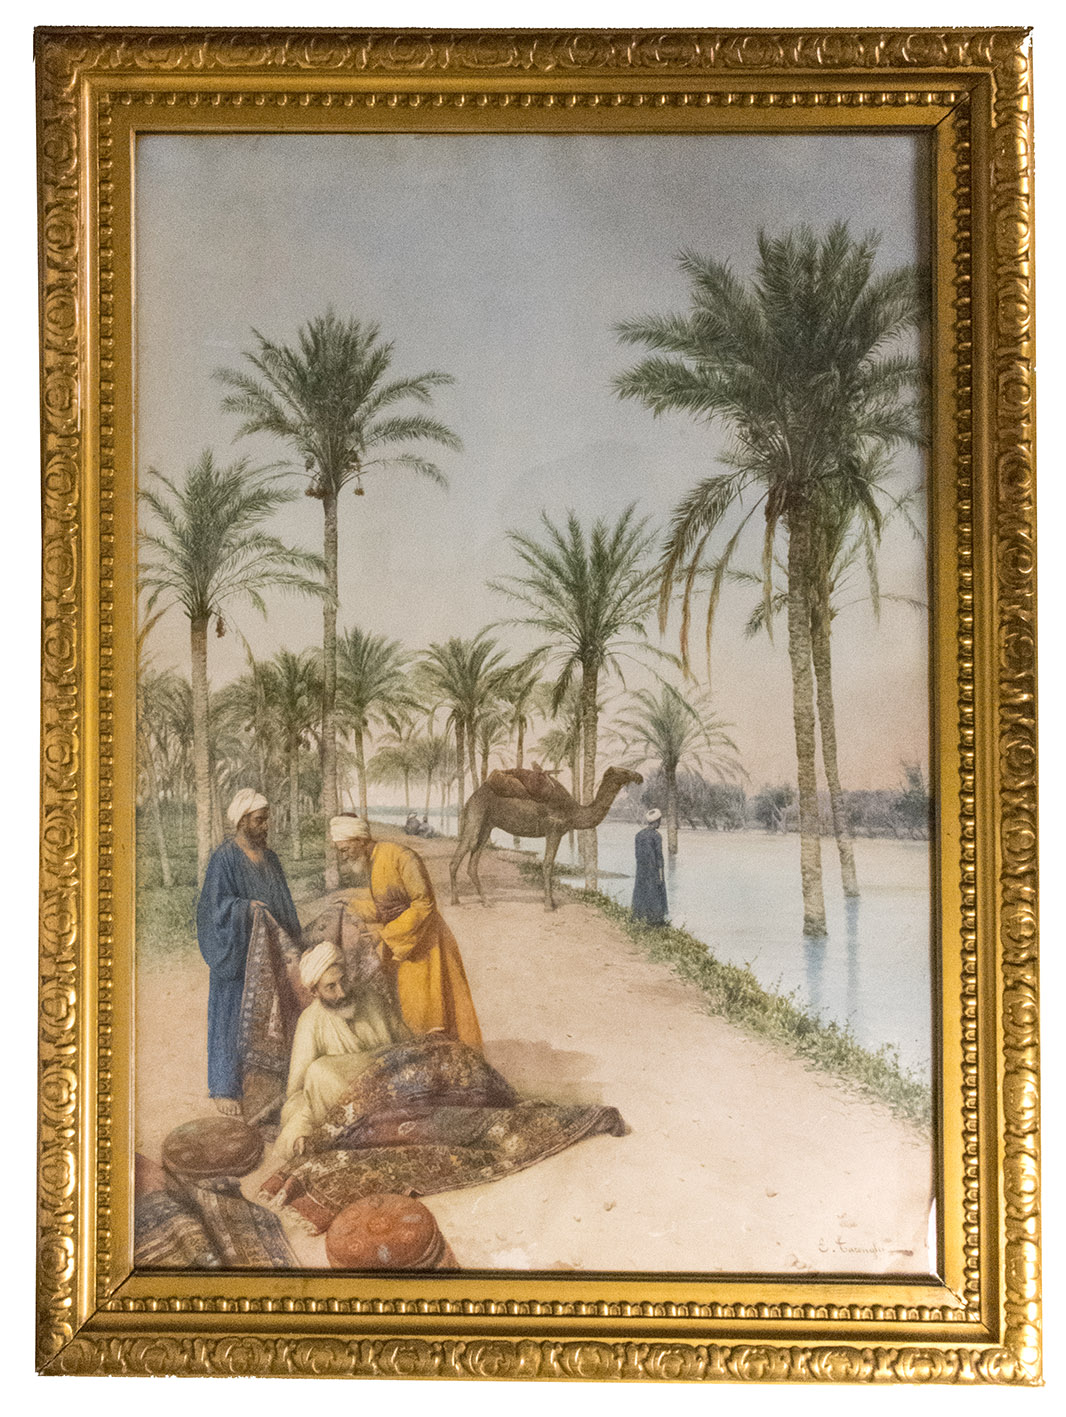 TARENGHI, Enrico. - [Carpet sellers and a dromedary beside the Nile].[Rome?, late 19th century?]. Watercolour on a large sheet of paper (image size: 74.5 x 52 cm), signed at the foot right: 